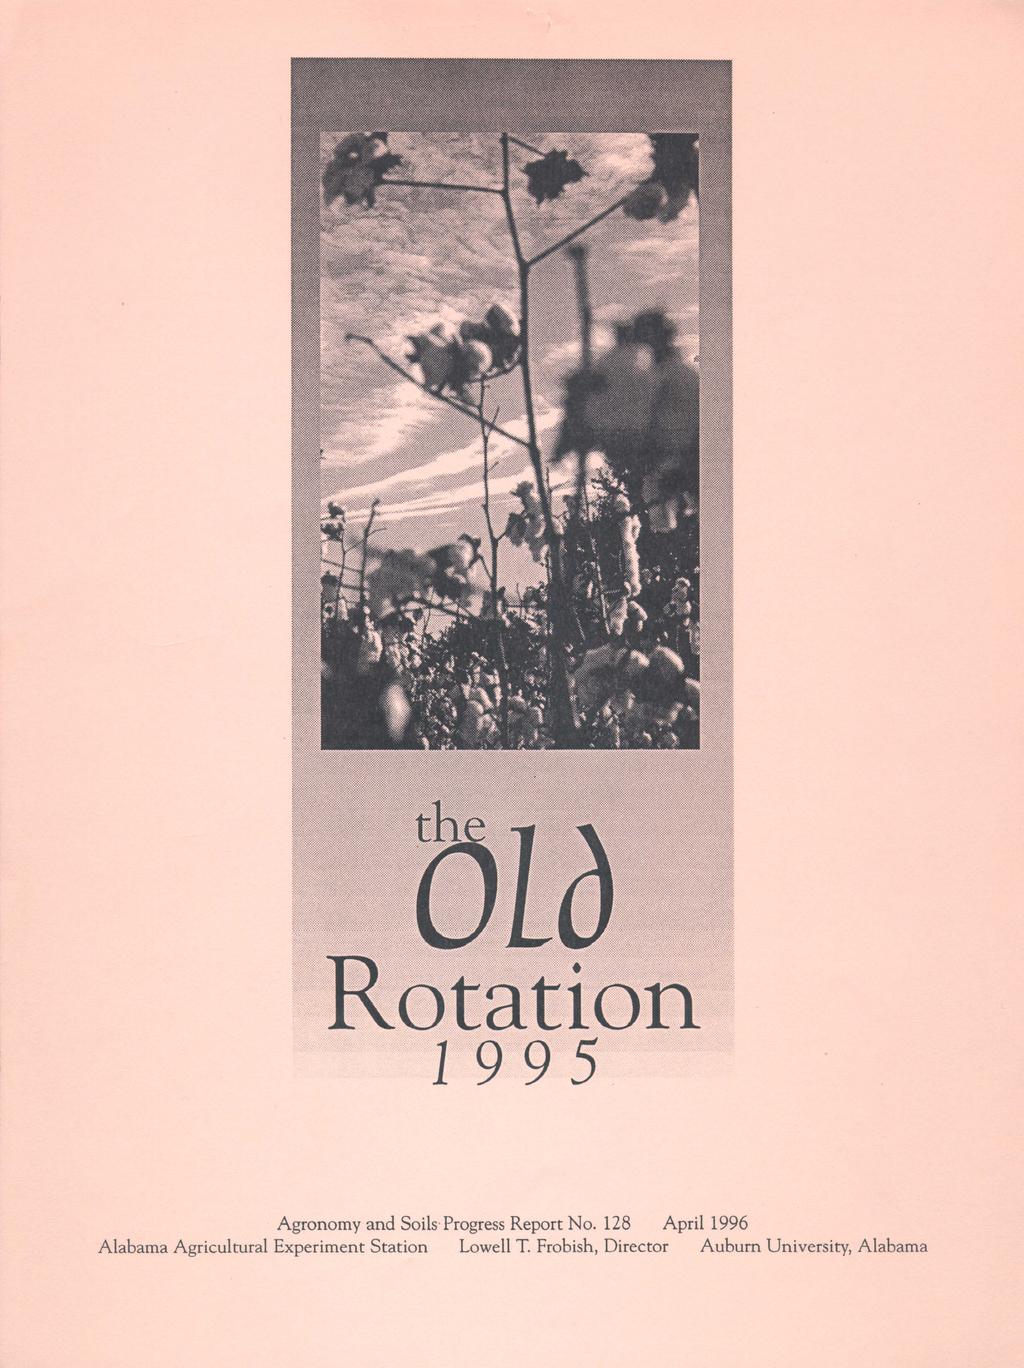 the olo Rotation 1995 Agronomy and Soils Progress Report No.